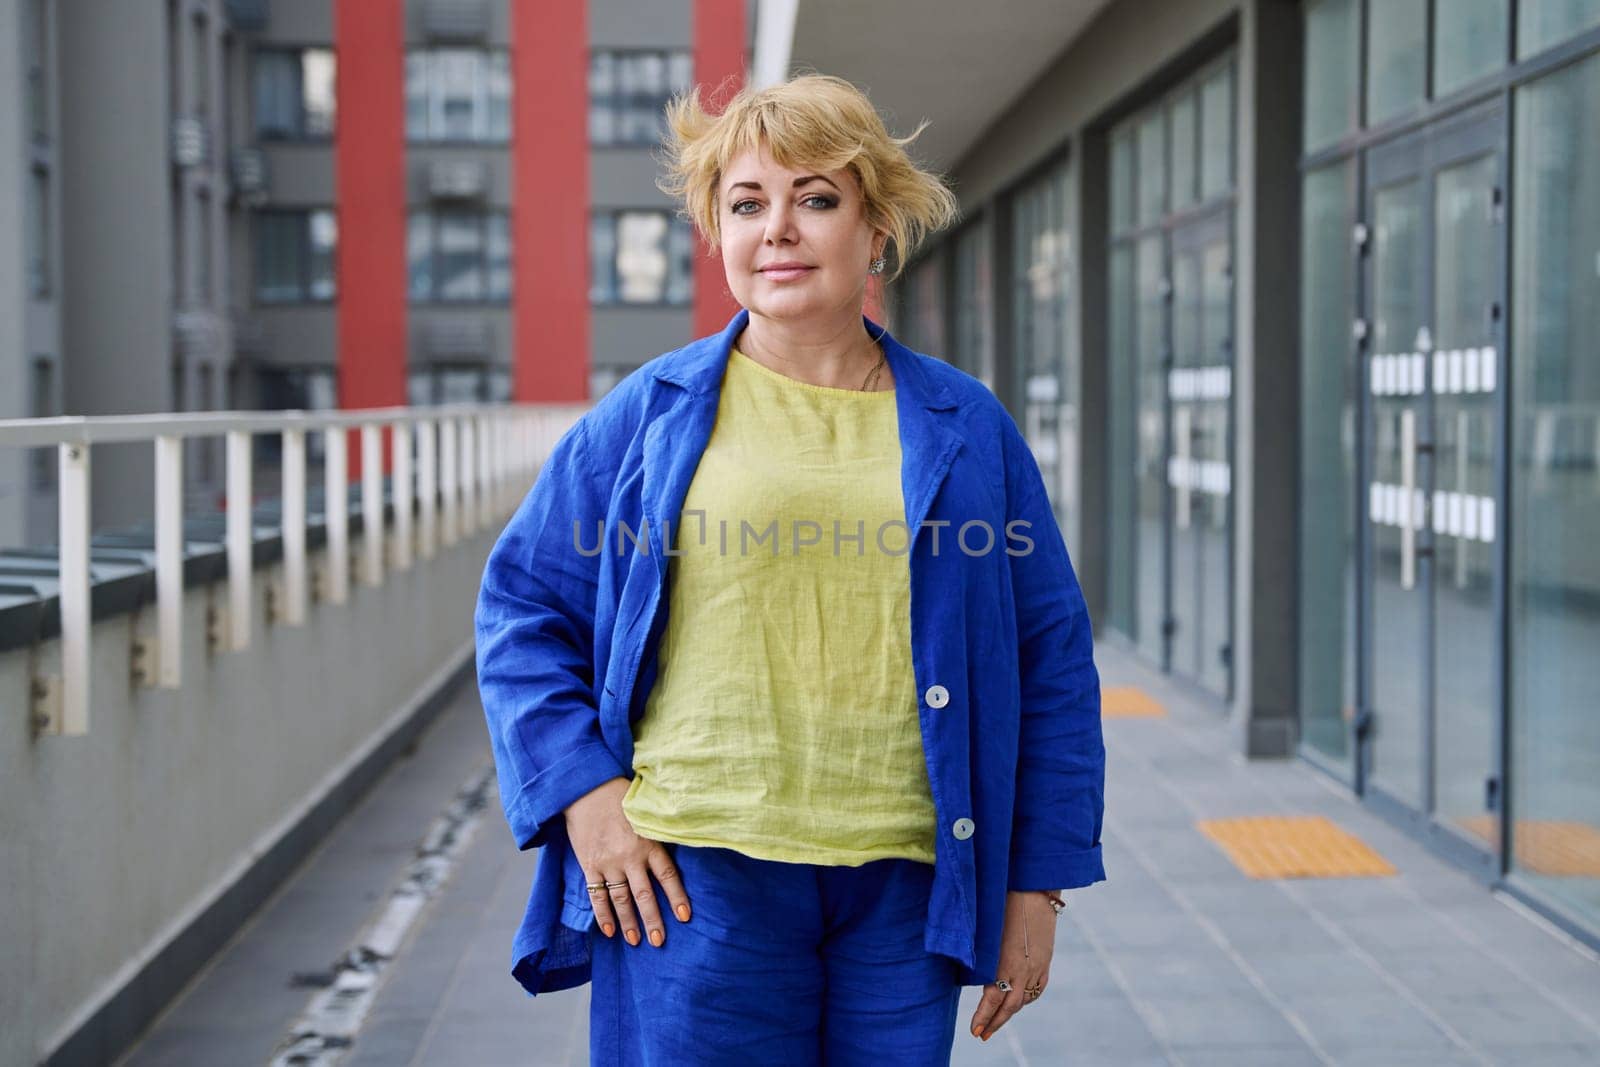 Portrait happy elegant mature woman 50 years old outdoor, urban background. Smiling beautiful blonde female looking at camera in city. Age, lifestyle, beauty, fashion concept